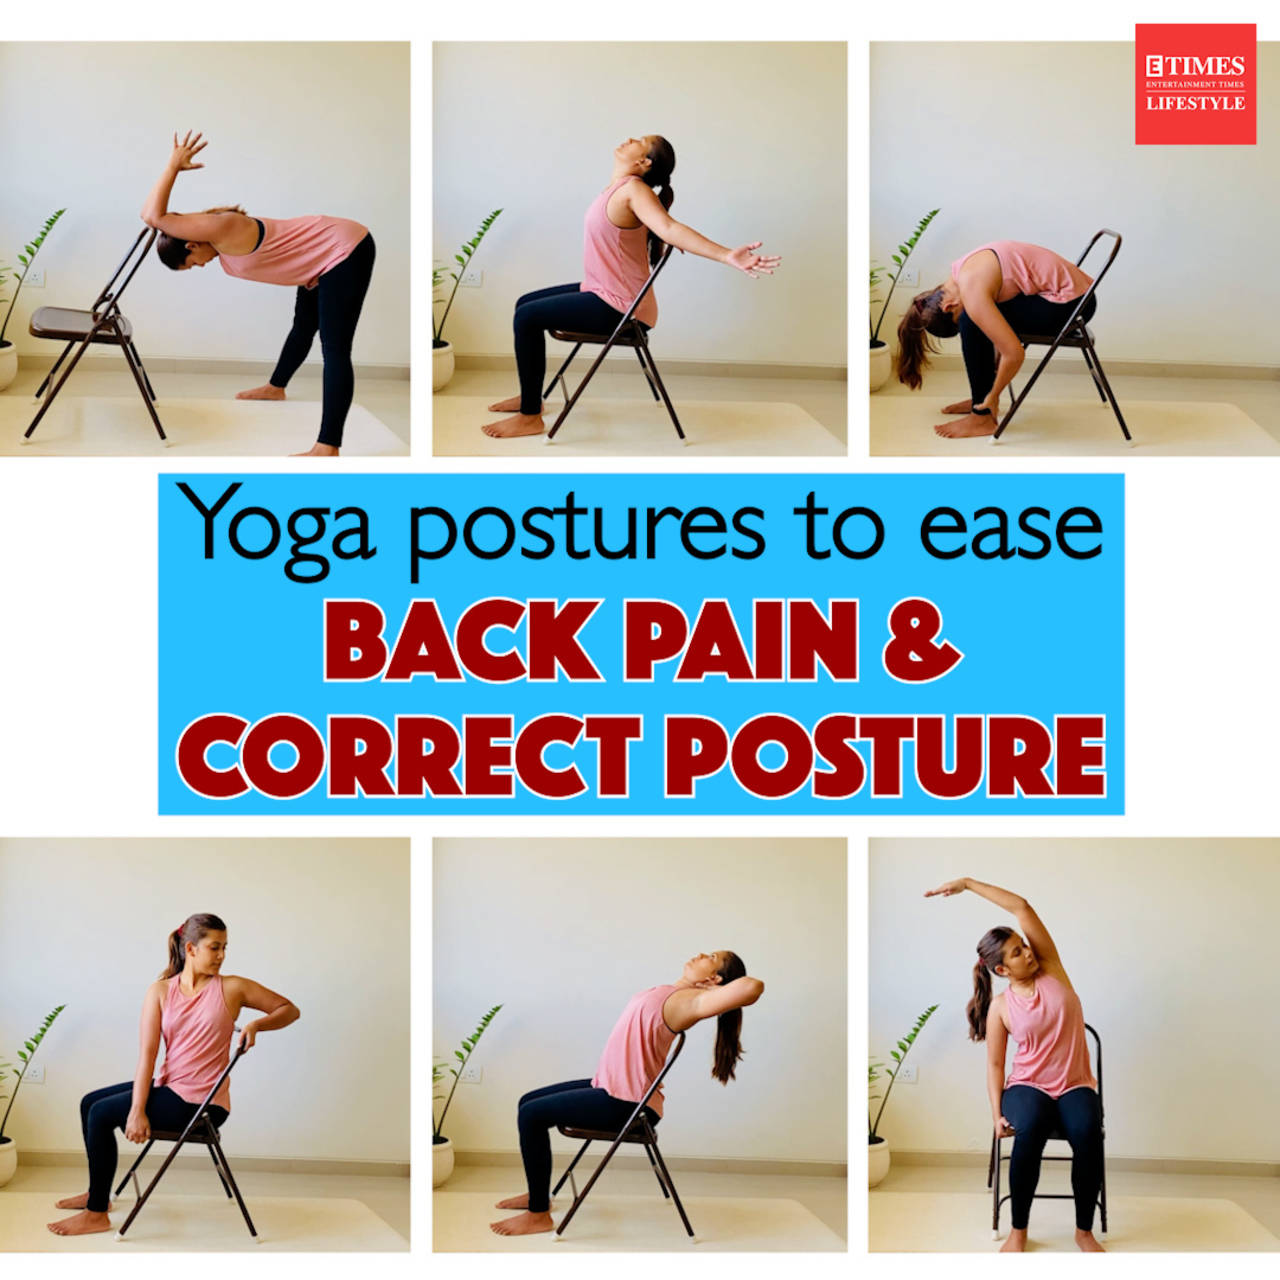 Seven Minutes to a Pain-Free Back: Yoga and Pilates exercises to ease back  pain, strengthen your core and improve your posture